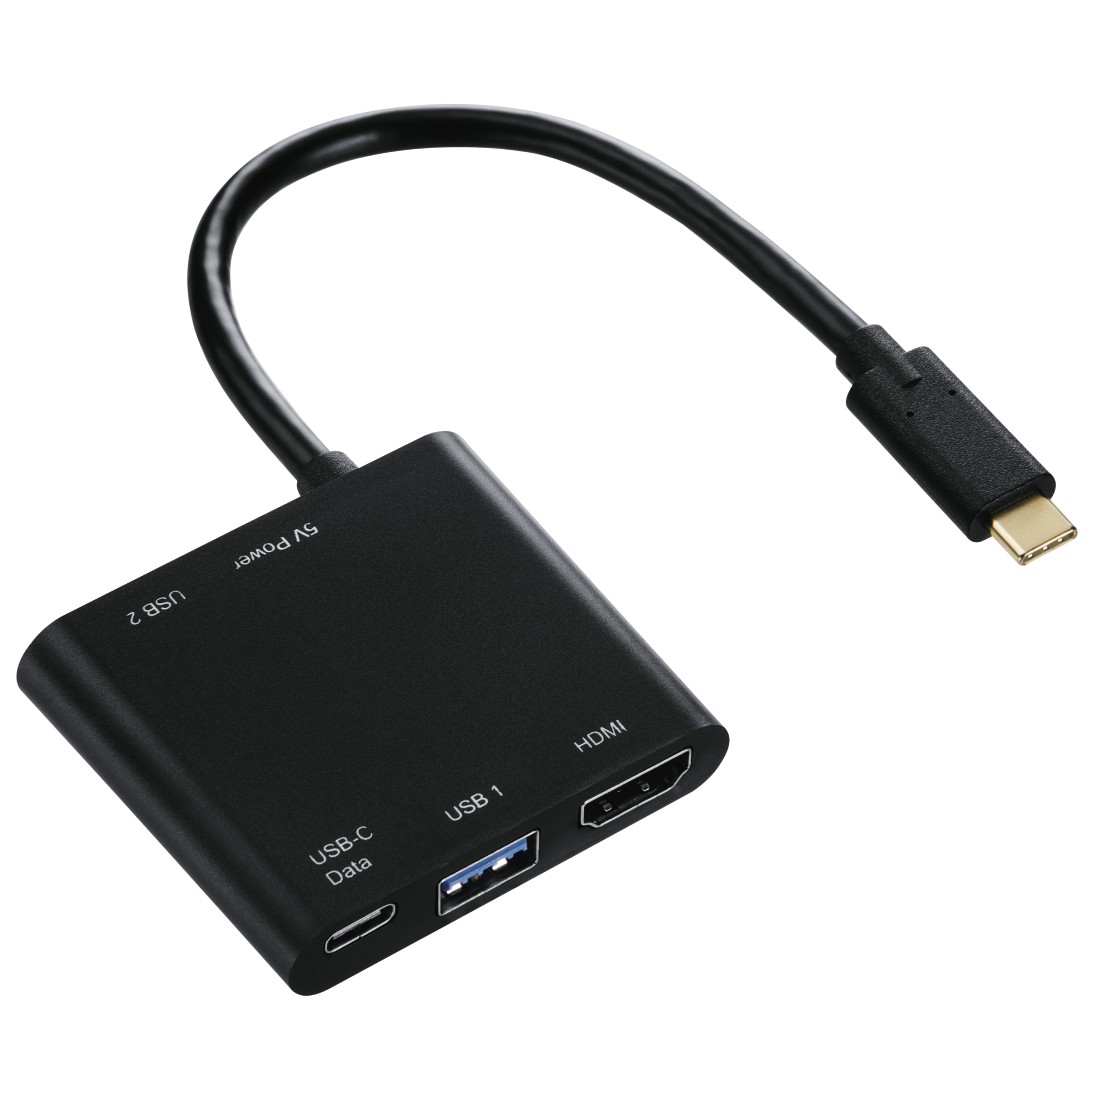 00135729 Hama 4-in-1 USB-C Multiport Adapter for 2x USB 3.1, HDMI™ and USB-C  (data)